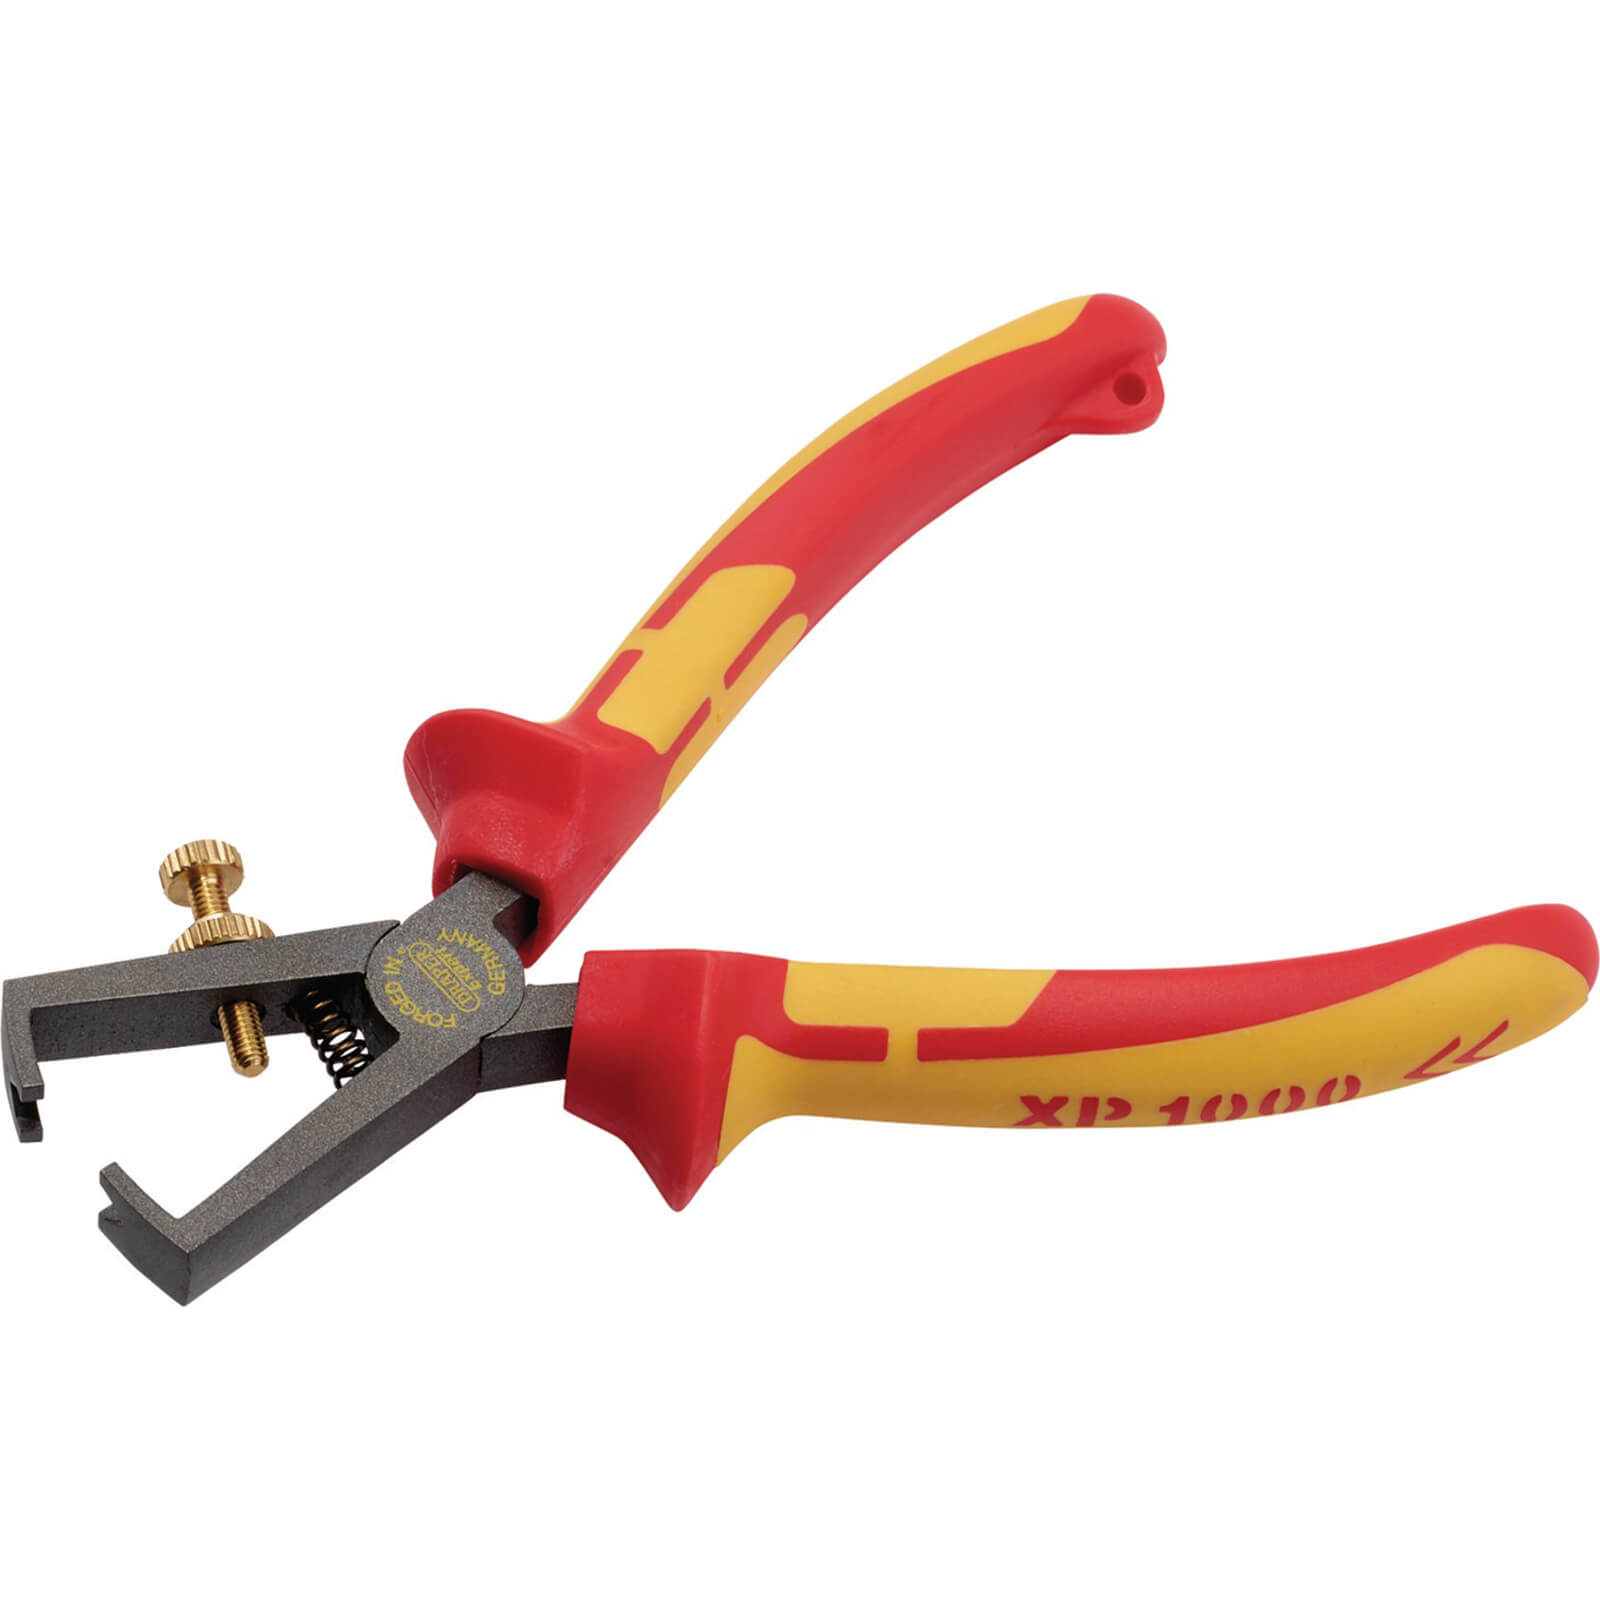 Photo of Draper Xp1000 Vde Insulated Tethered Wire Strippers 160mm